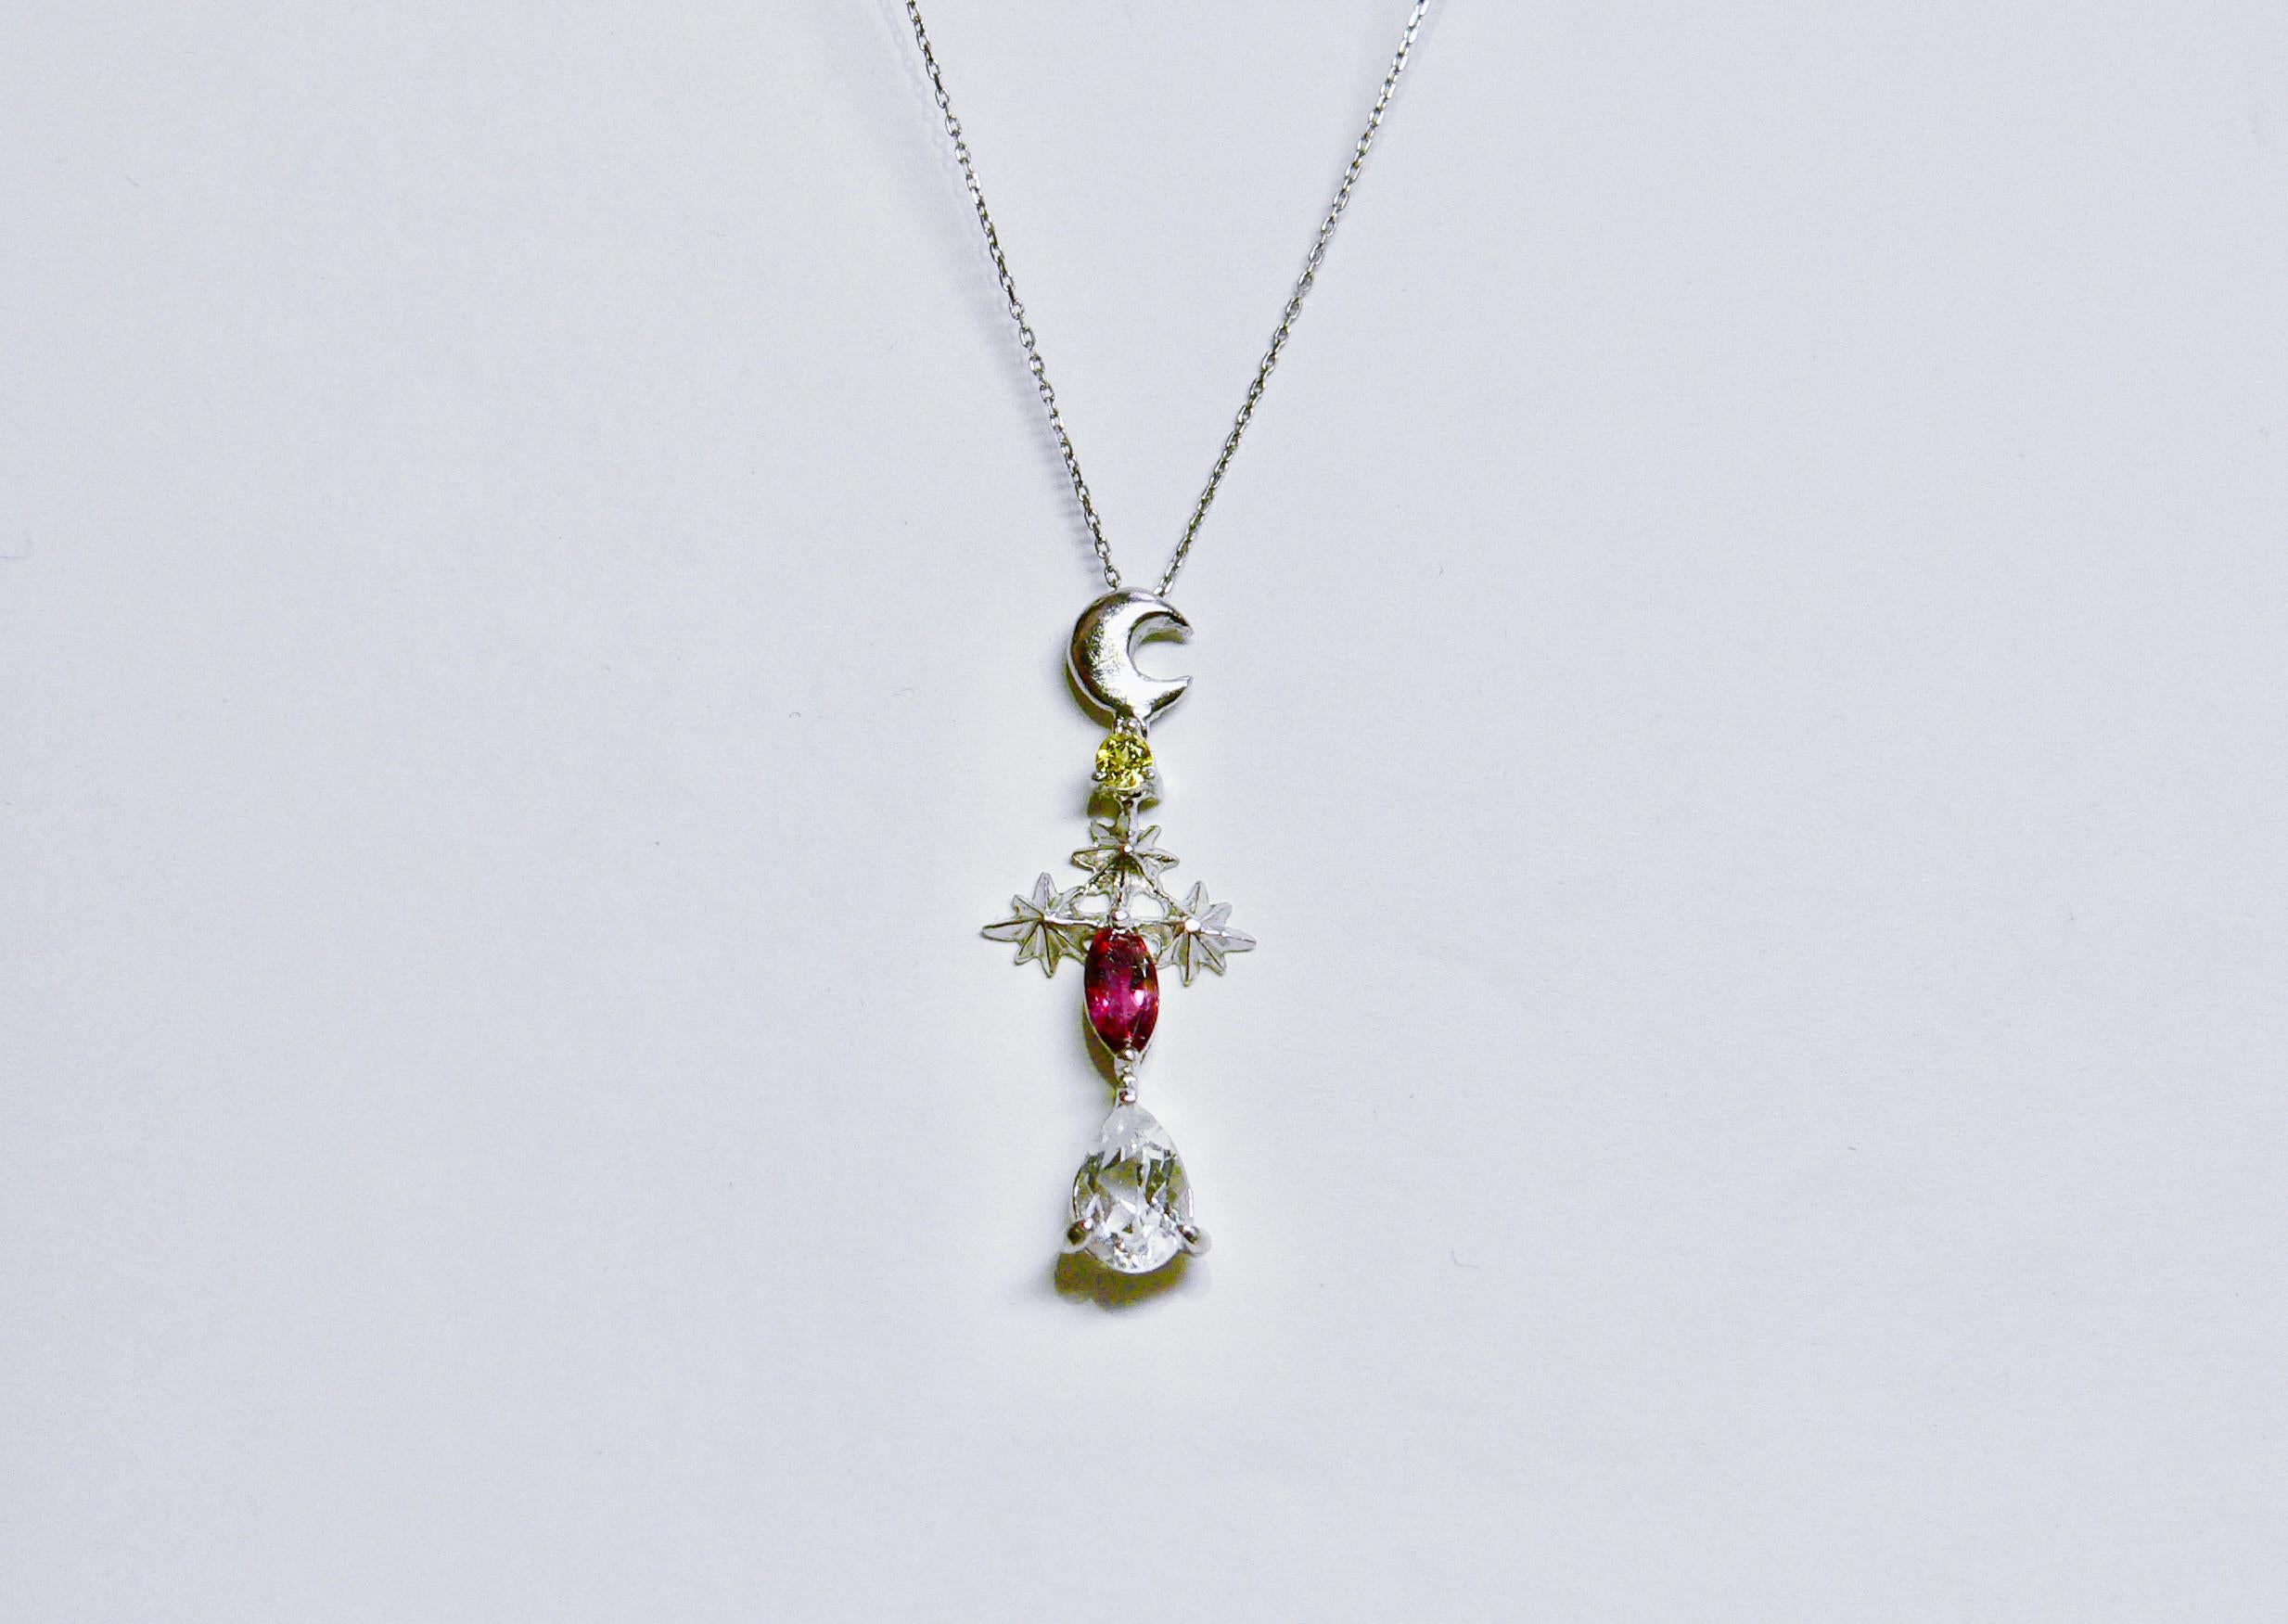 Night sky with crescent moon and stars with some colors.

This necklace is made of rhodium plated Sterling Silver with two colors of Tourmaline (canary yellow tourmaline and pink tourmaline) and colorless Quartz as one of the Night Collection. This